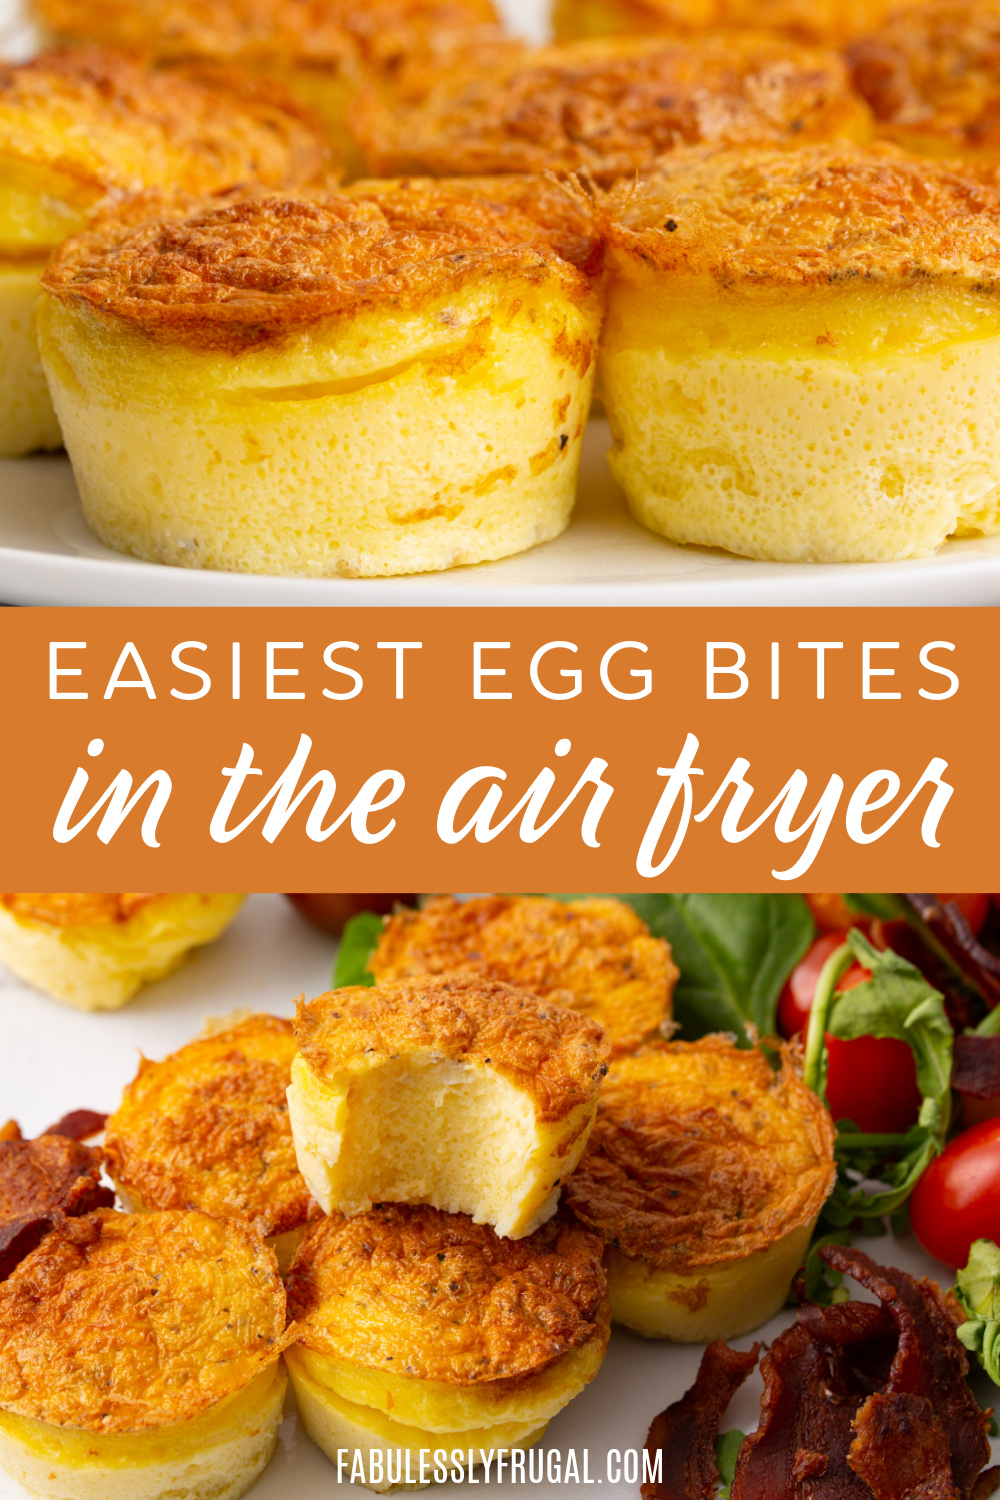 https://fabulesslyfrugal.com/wp-content/uploads/2023/02/how-to-make-egg-bites-in-the-air-fryer-2.jpg